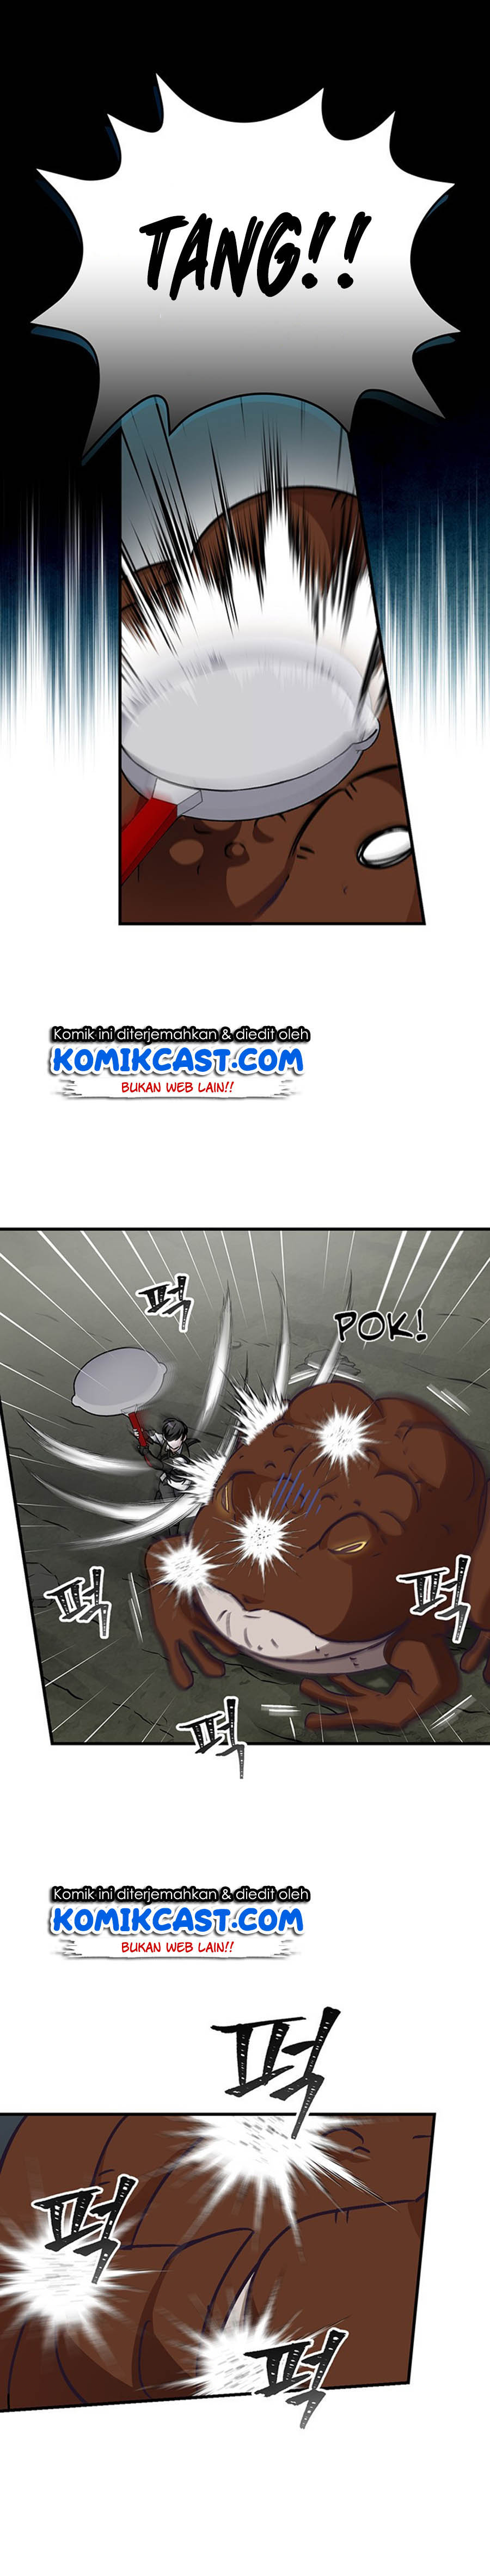 Leveling Up, by Only Eating! Chapter 47